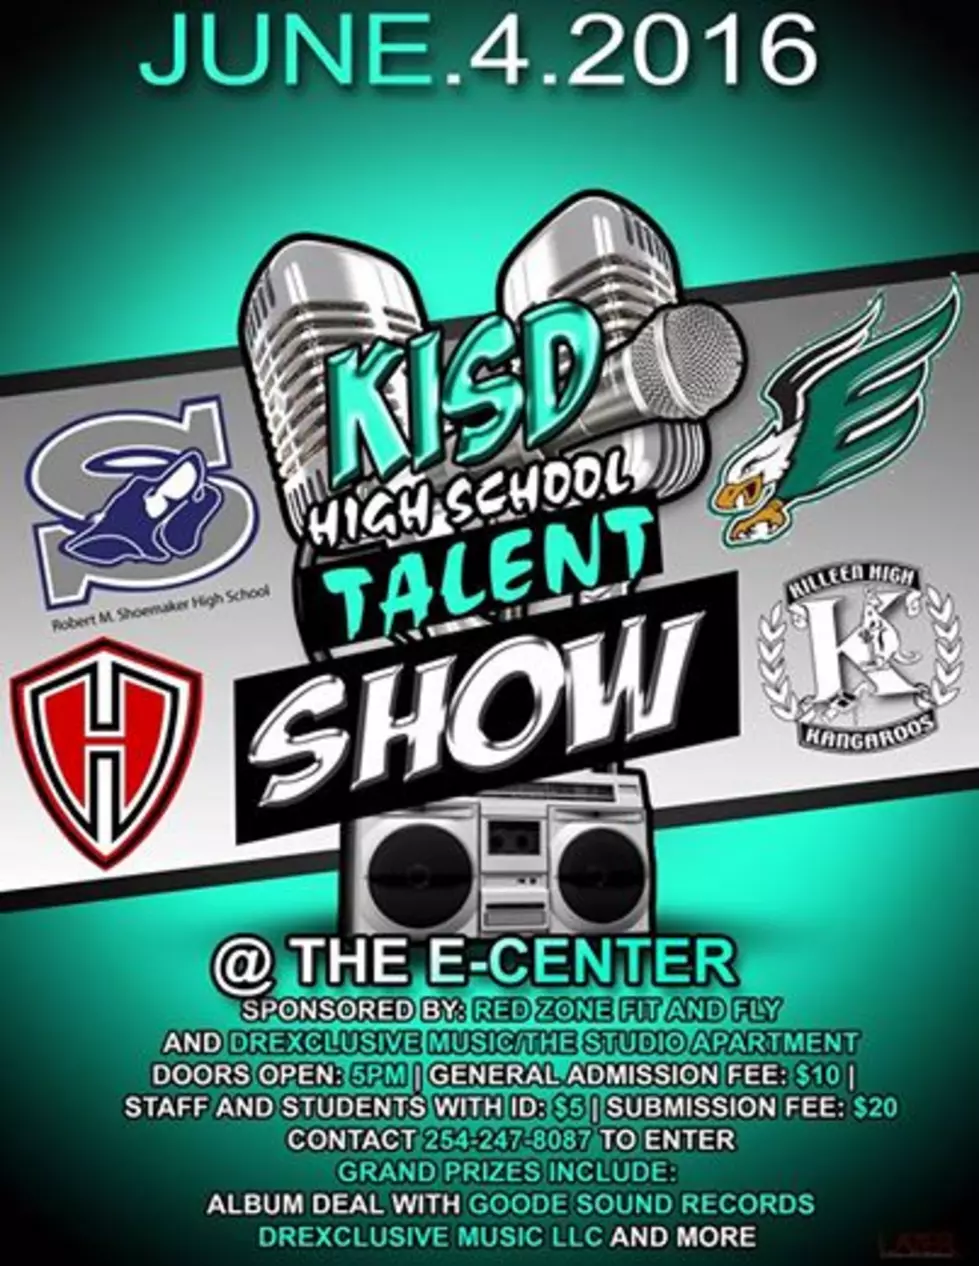 Attention All Killeen High School Students!! Get ready for the KISD High School Talent Show!!!